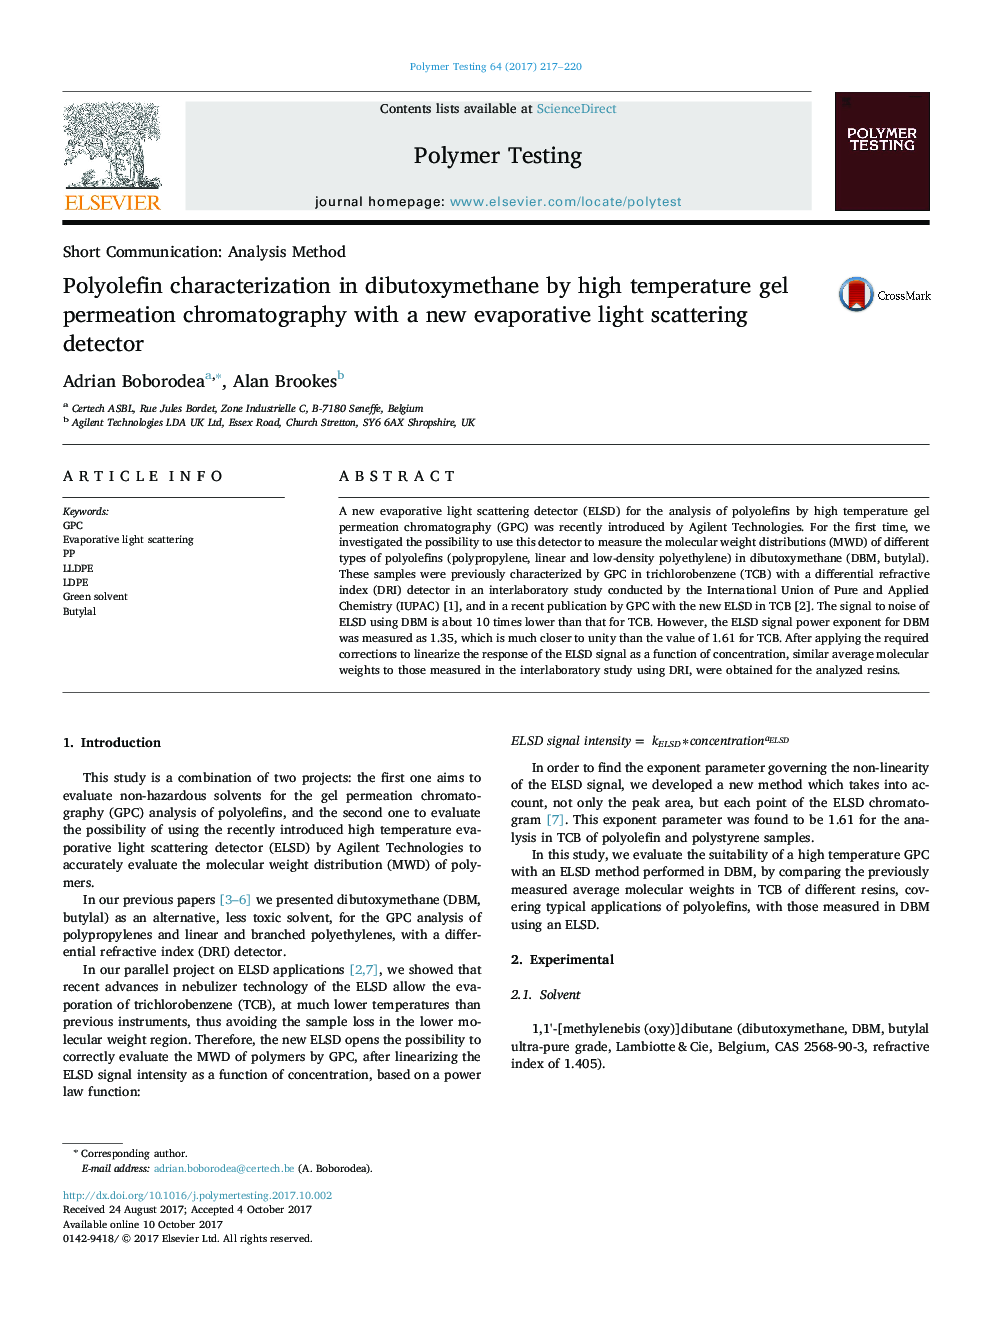 Polyolefin characterization in dibutoxymethane by high temperature gel permeation chromatography with a new evaporative light scattering detector